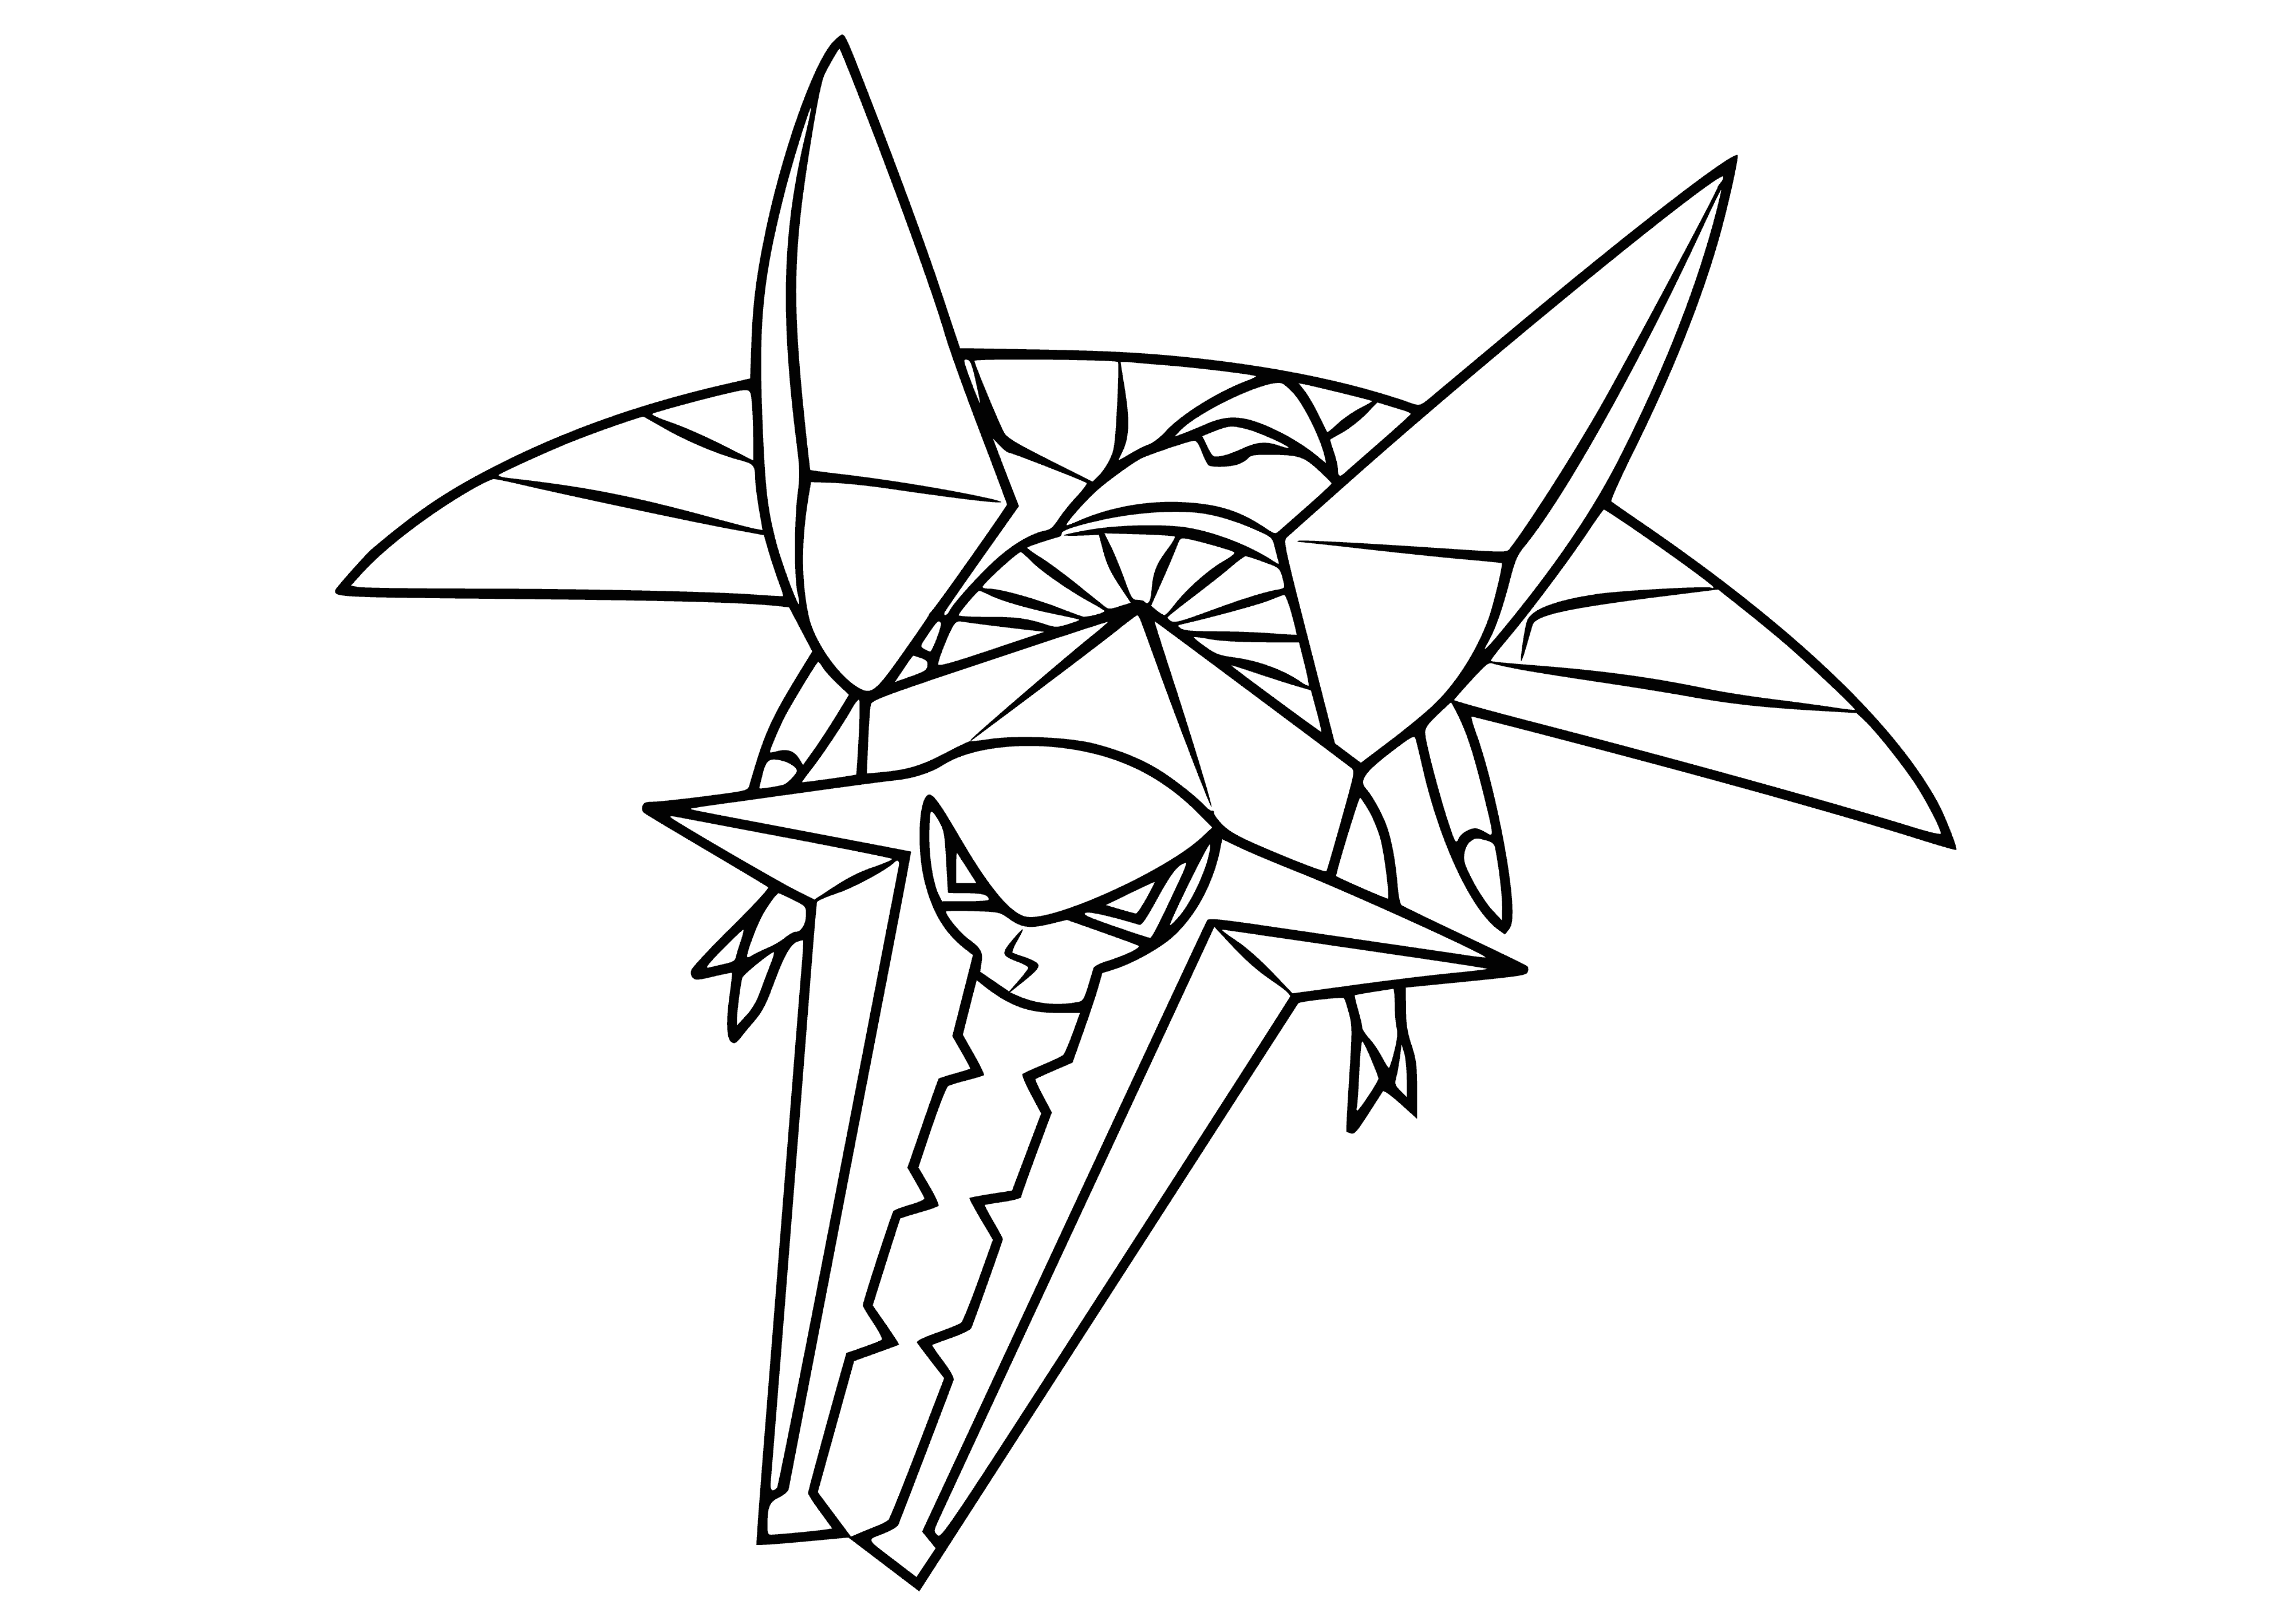 coloring page: Pokémon Vikavolt is a large, beetle-like Pokémon with four wings and two big pincers. It can fire electrical beams, levitate using its wings energy & evolves from Charjabug.